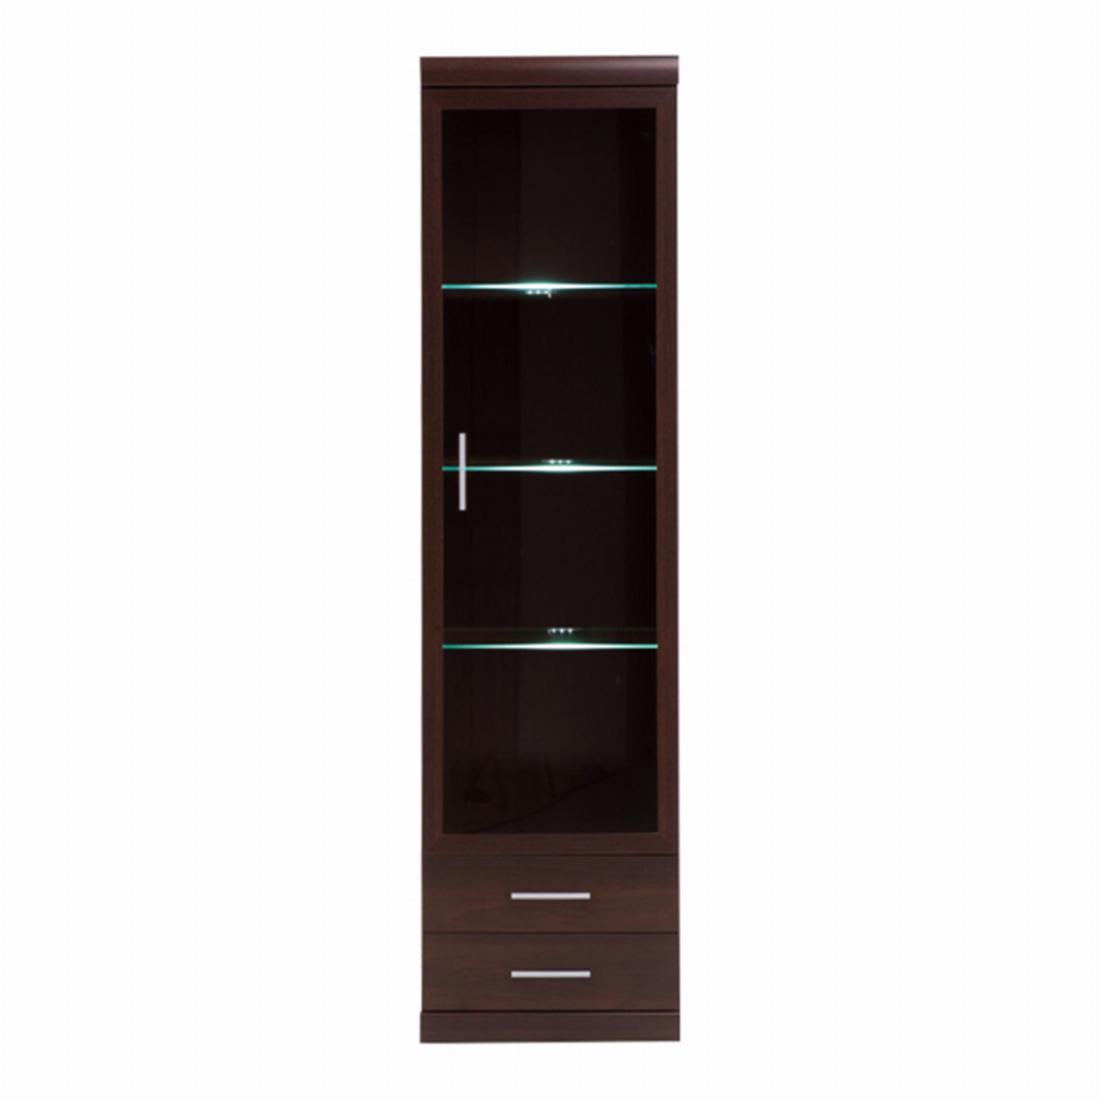 Imperial Tall Glazed 1 Door 2 Drawer Narrow Cabinet